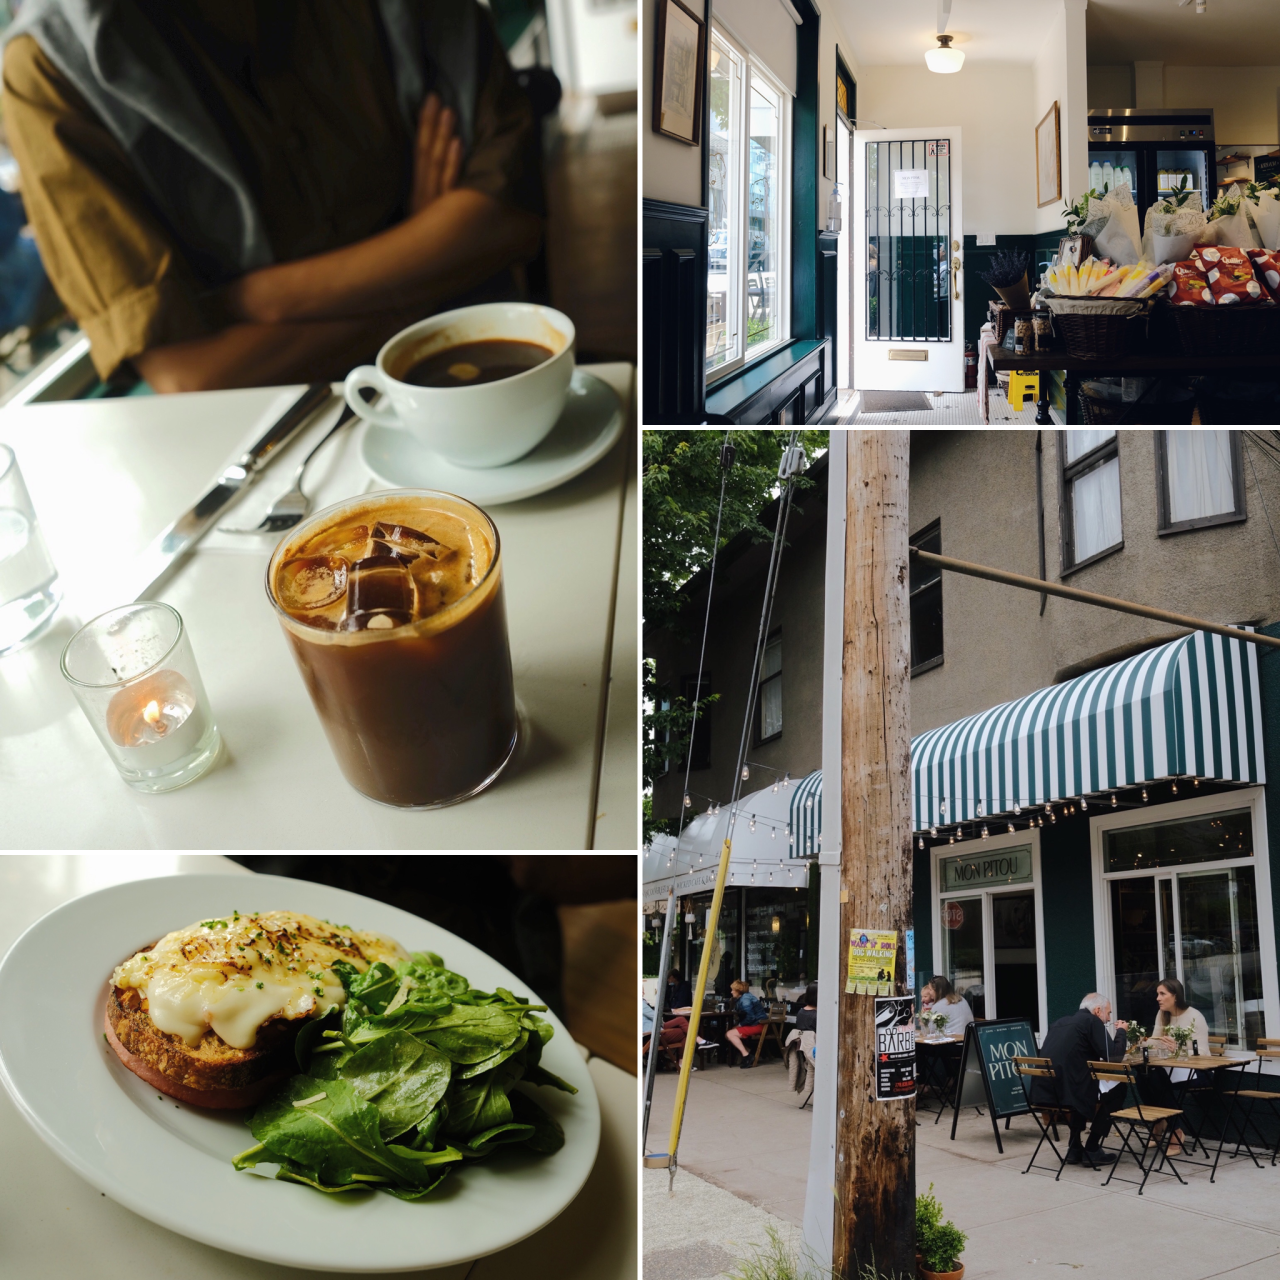 Marché Mon Pitou x Fairview Slopes.
“If you cannot already tell by strolling by it, Mon Pitou is such a cute little coffee shop meets bistro nestled within a sort of nexus of intersections of some quaint residential streets just aways away from the...